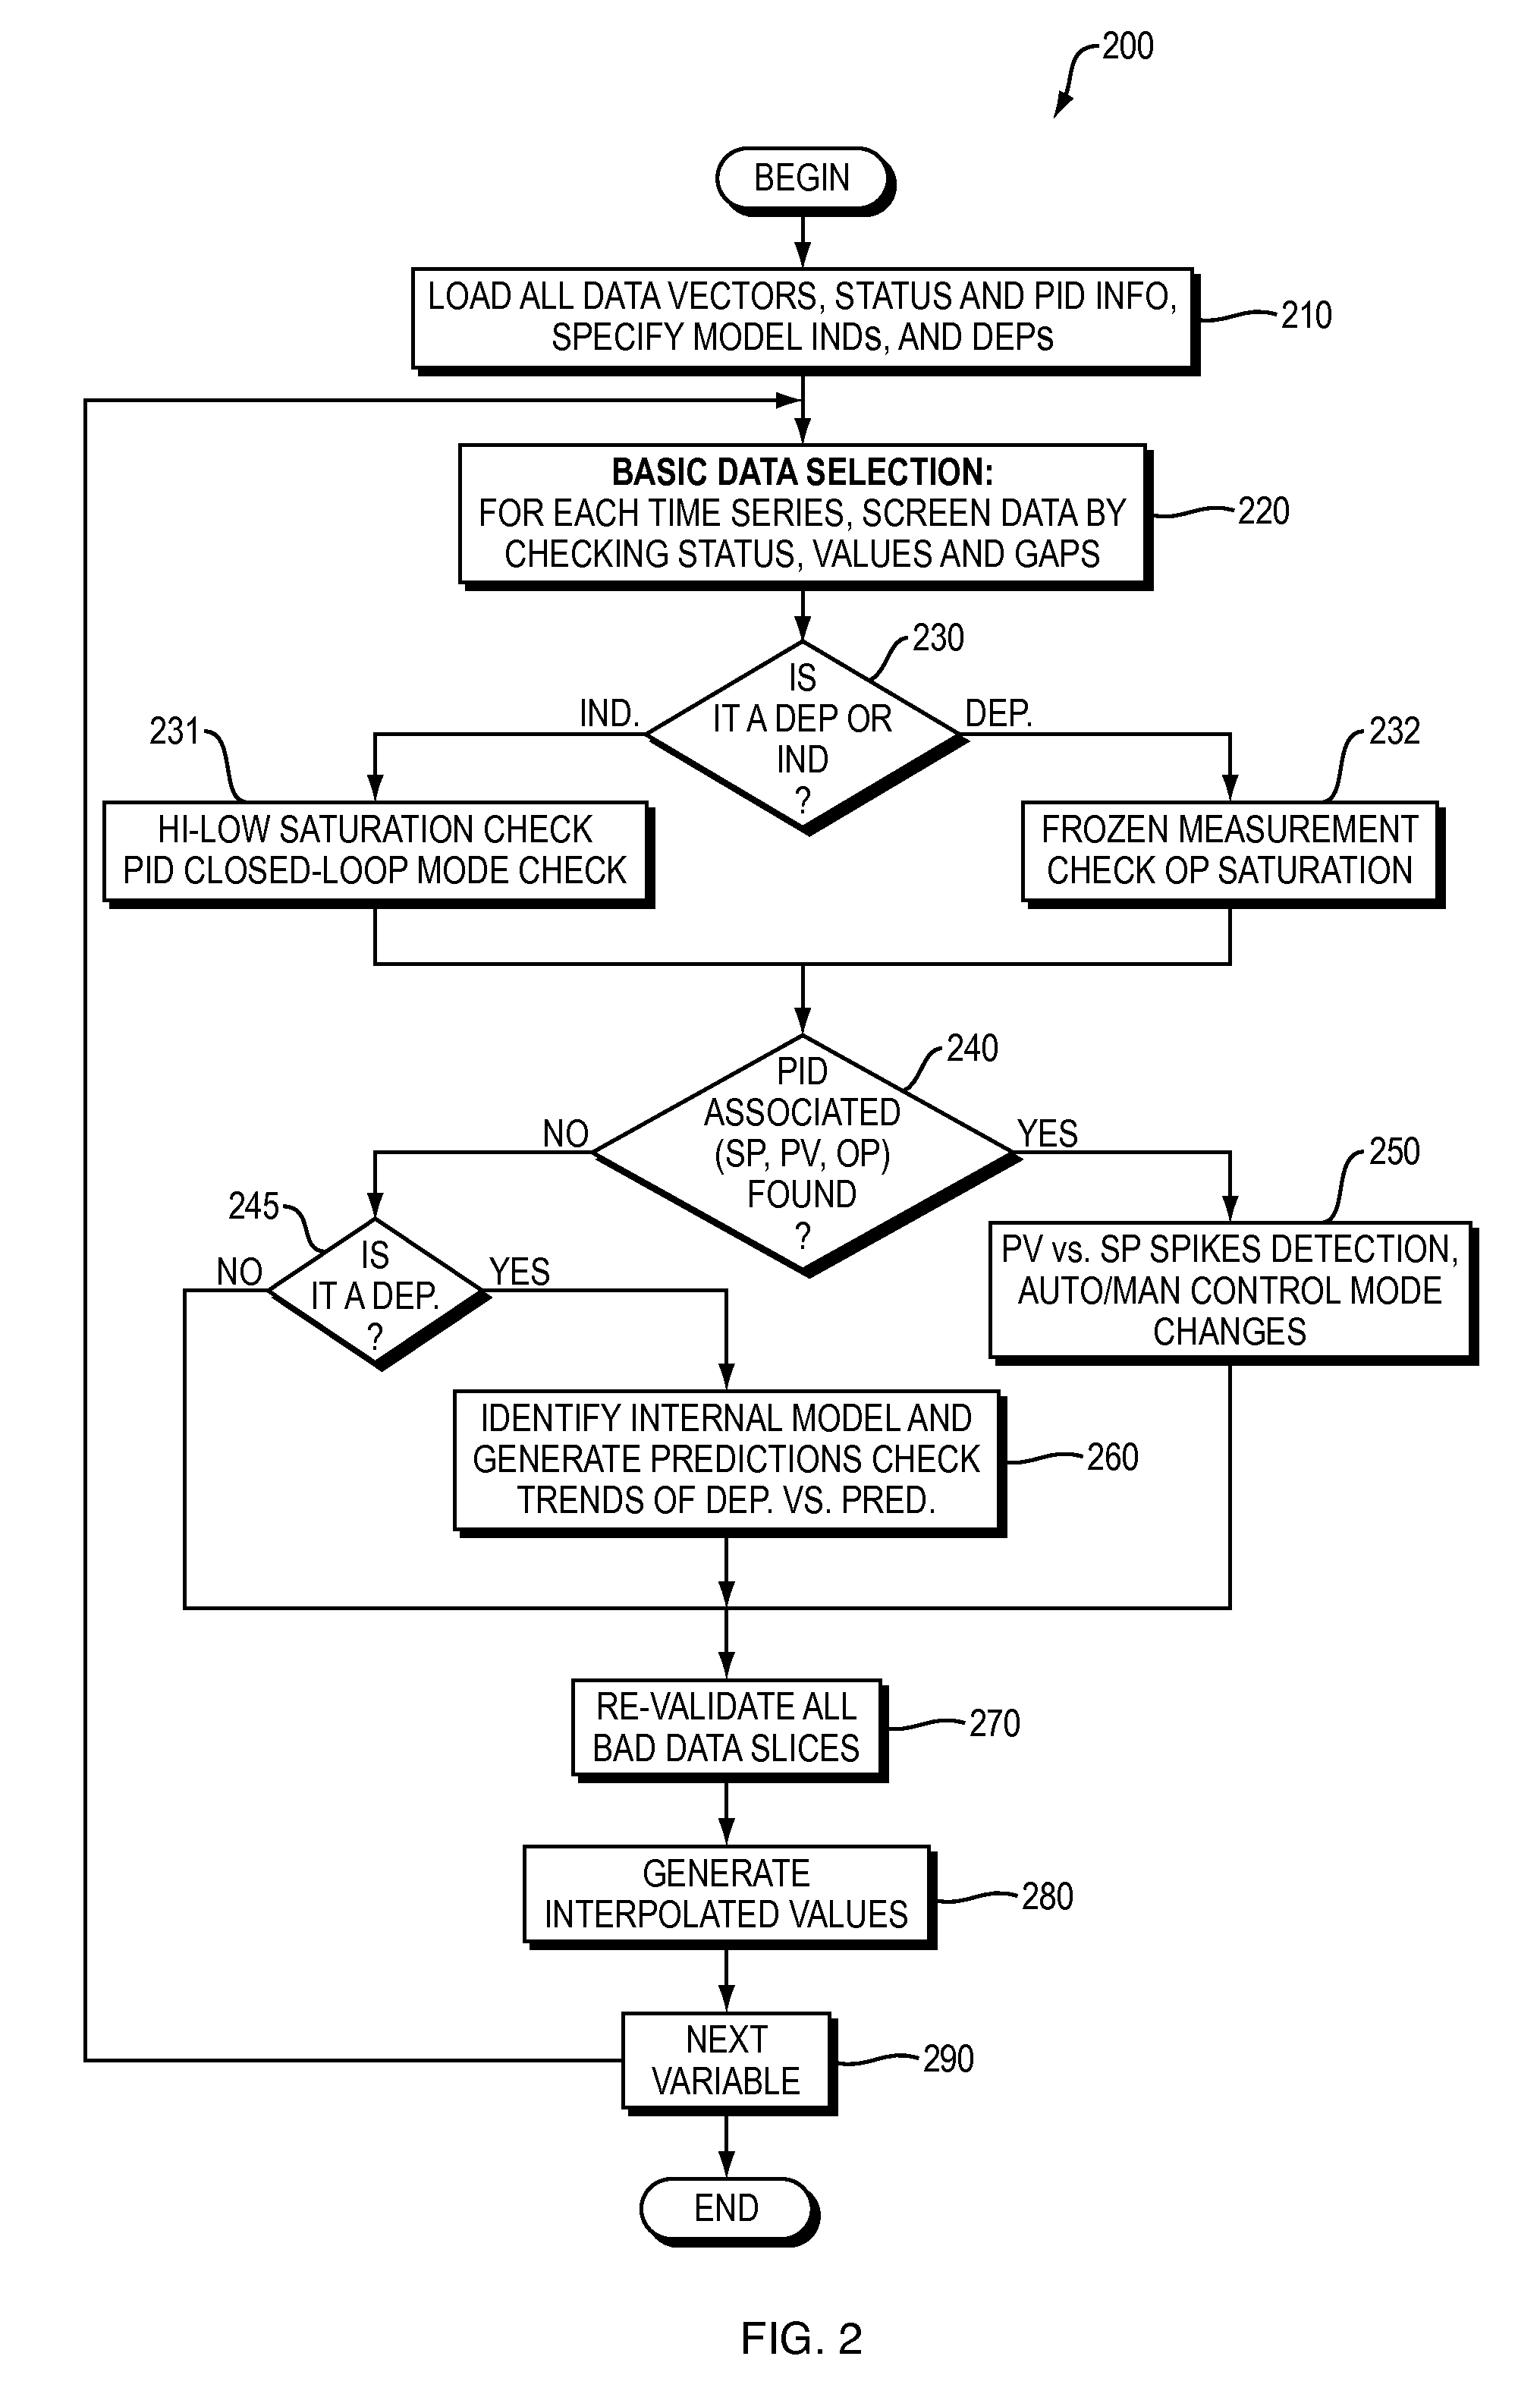 Apparatus and method for automated data selection in model identification and adaptation in multivariable process control